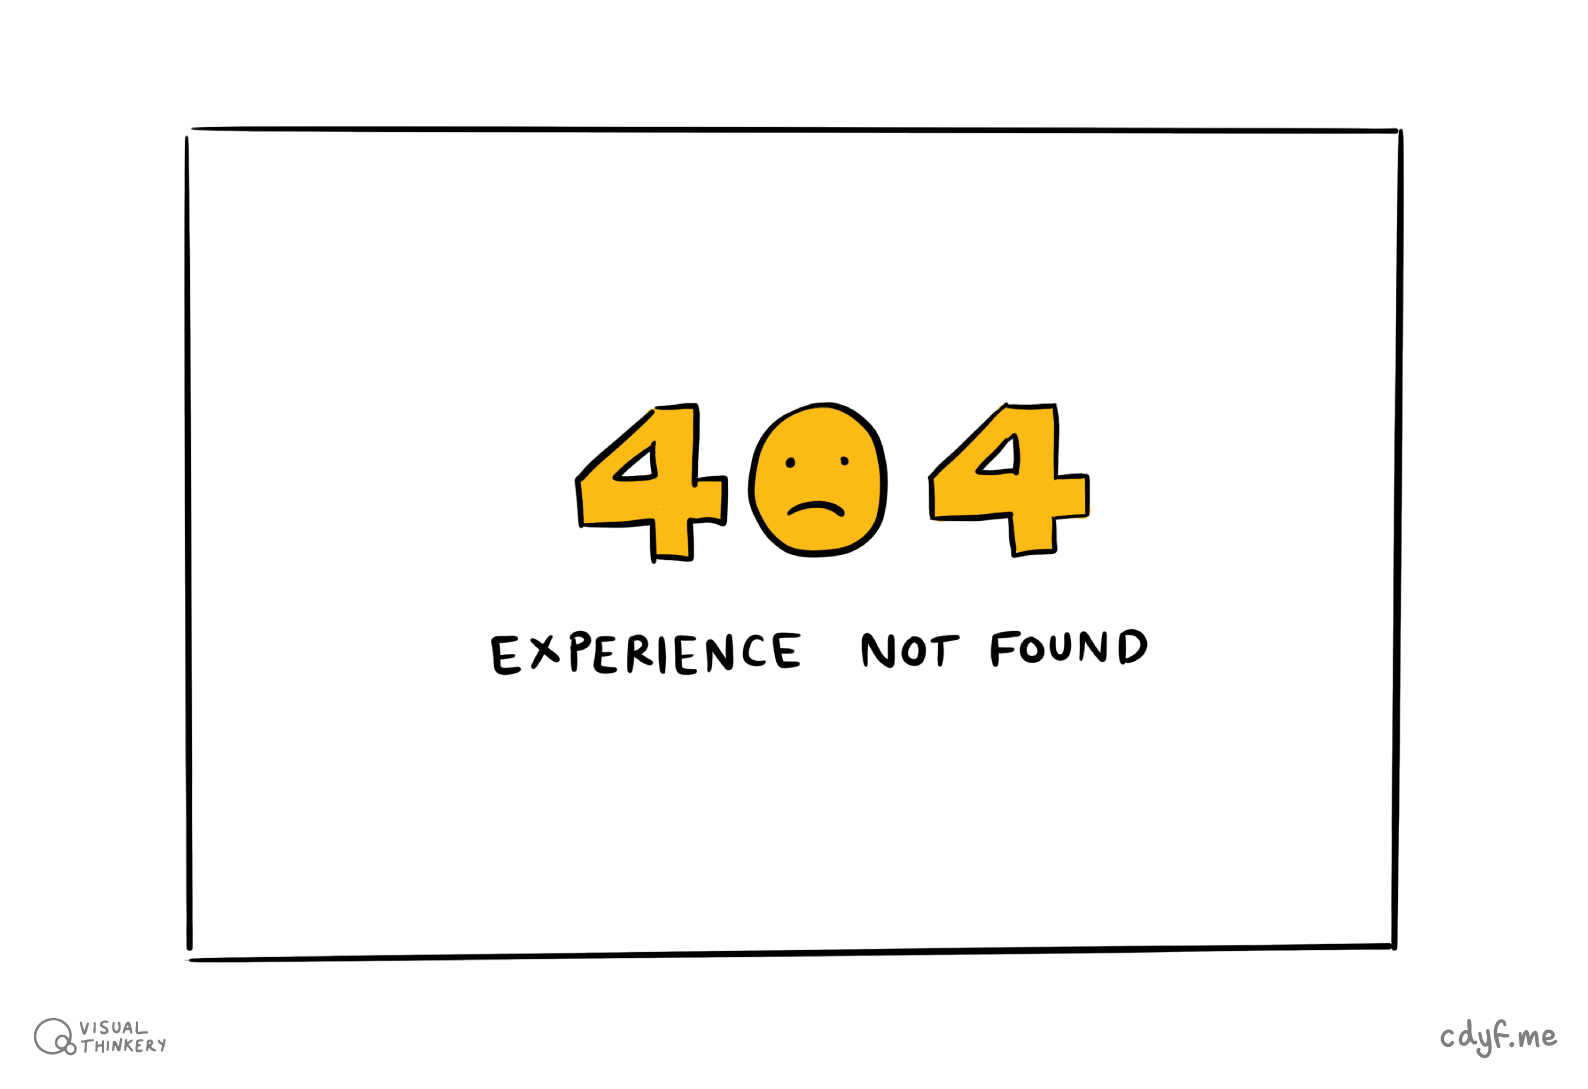 Do you respond with a sheepish experience not found error message when people ask about your experience? Is your experience like the classic page not found HTTP 404? The client sent you a valid request for your experience, but your server couldn’t find it. Awkward. Embarrassing silence? 😳 Don’t worry, there are some simple and easy ways to build your experience so that instead of negative 404’s, you can respond with a cheerfully positive 200 (OK), as described in this list of HTTP status codes. We’ll look at some of them in this chapter. Experience not found sketch by Visual Thinkery is licensed under CC-BY-ND